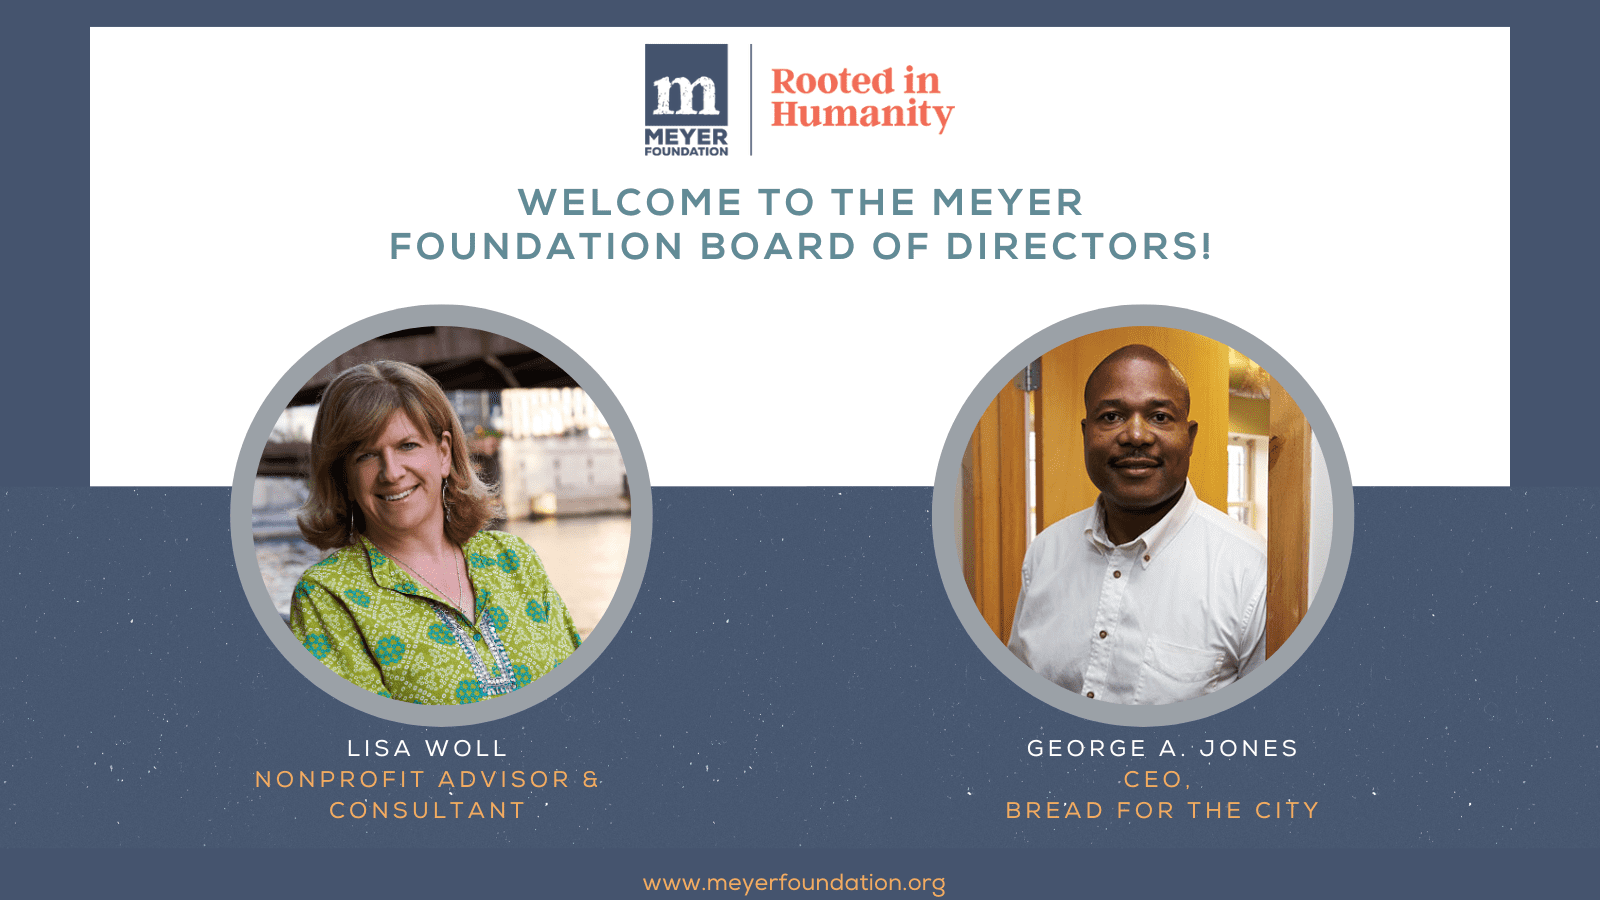 Welcome to the Meyer Foundation Board of Directors, Lisa and George!